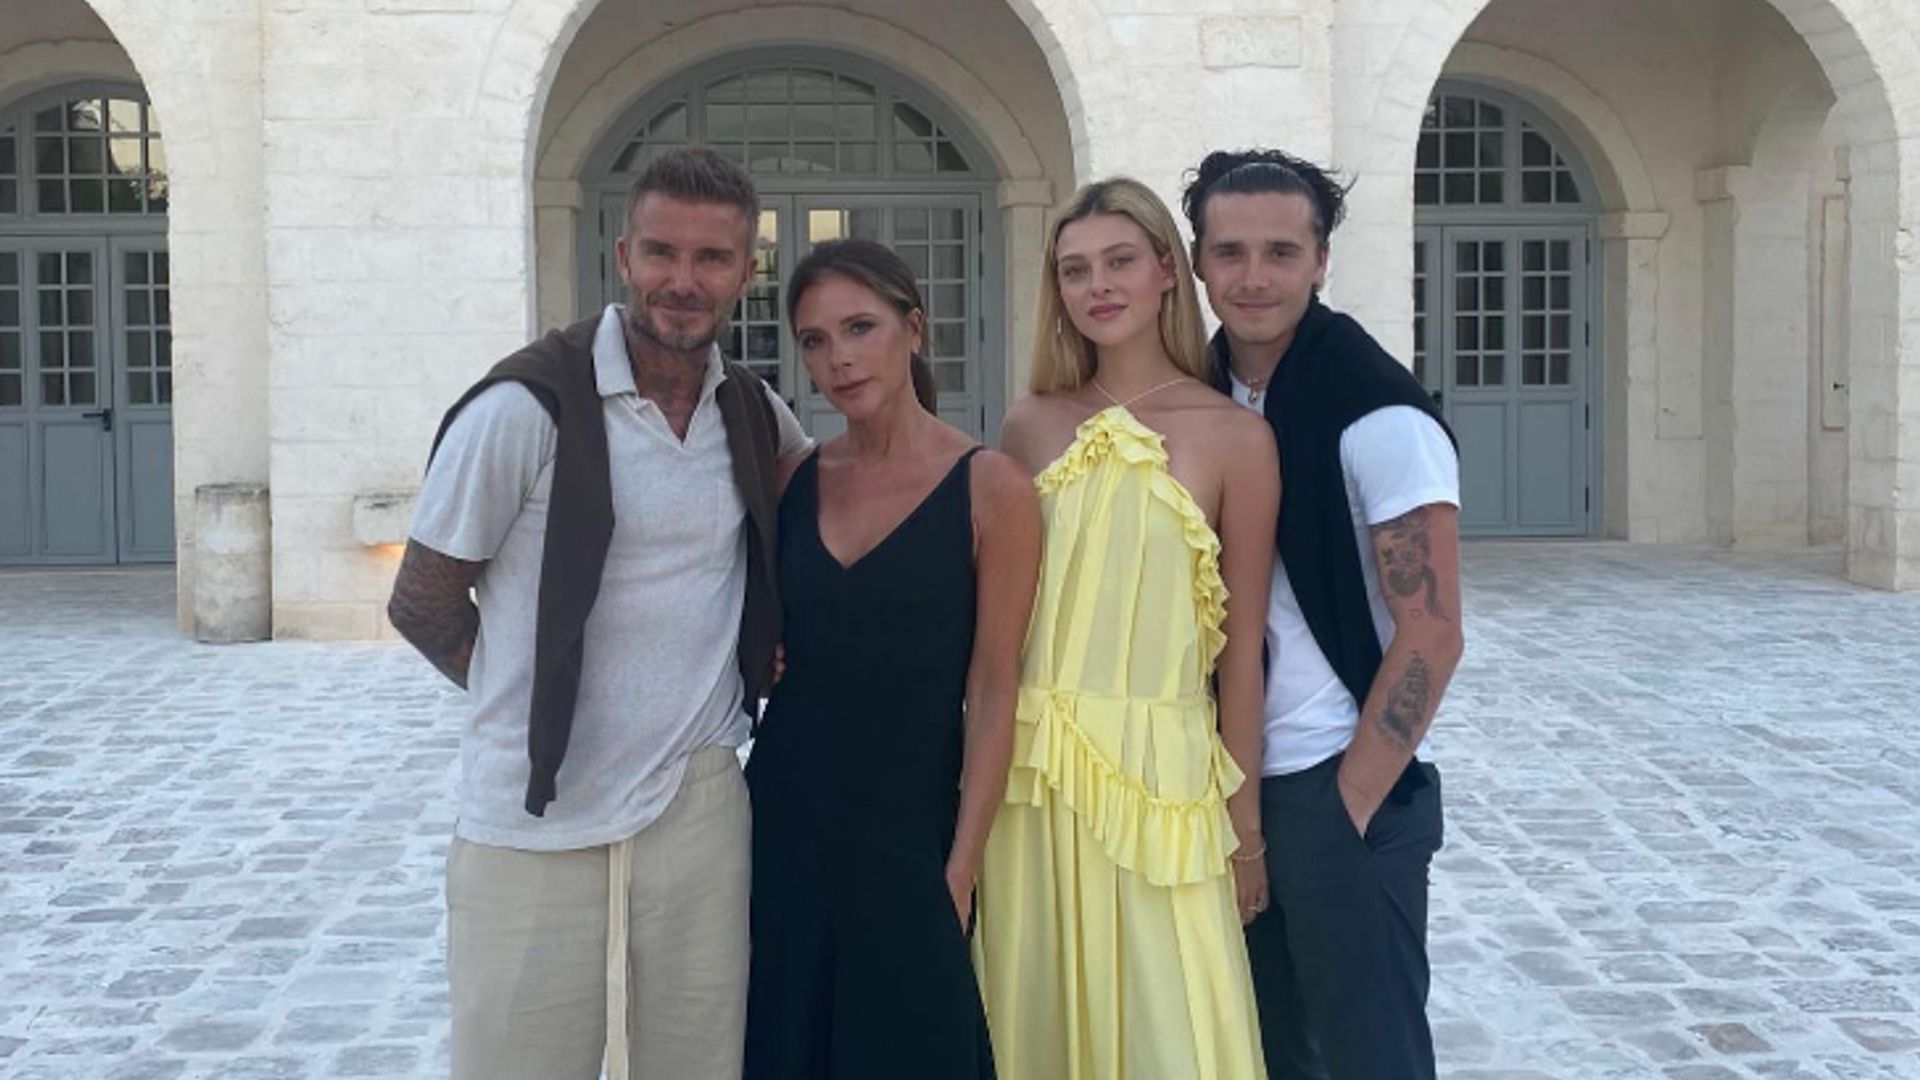 David and Victoria Beckham pose with Brooklyn and Nicola Peltz